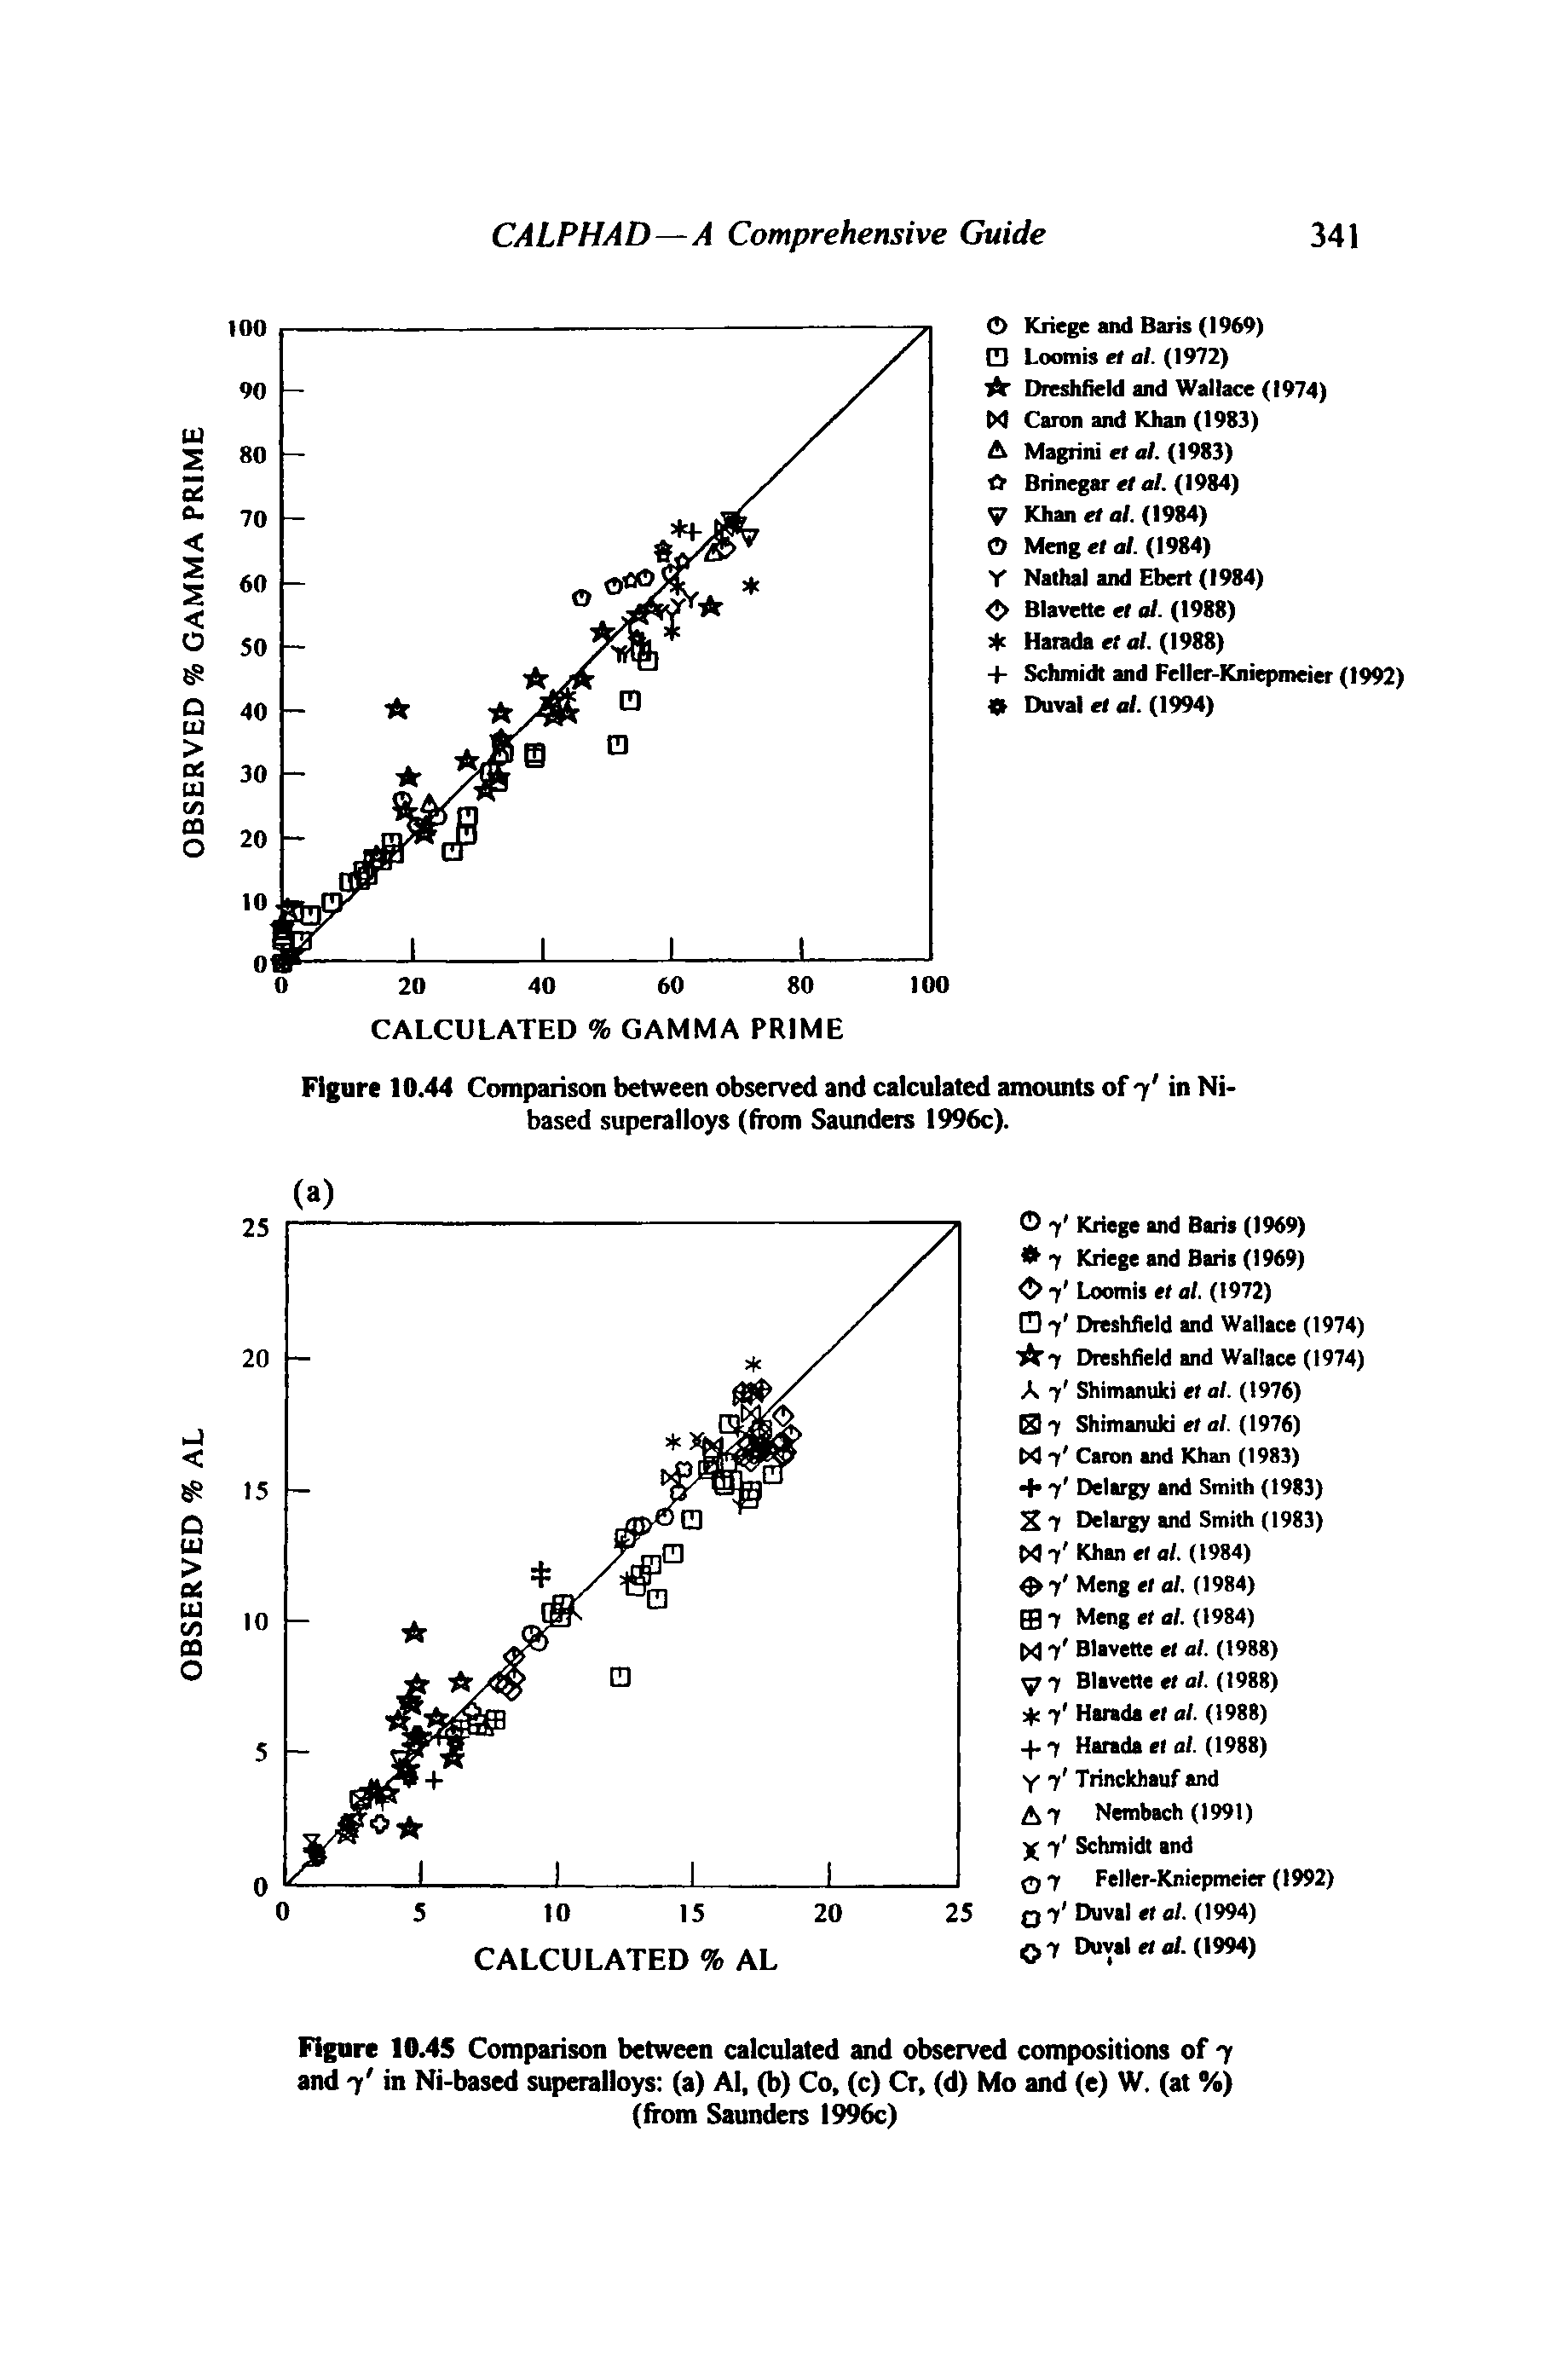 Figure 10.45 Comparison between calculated and observed compositions of 7 and 7 in Ni-based superalloys (a) Al, (b) Co, (c) Cr, (d) Mo and (e) W. (at %) (from Saunders I99te)...